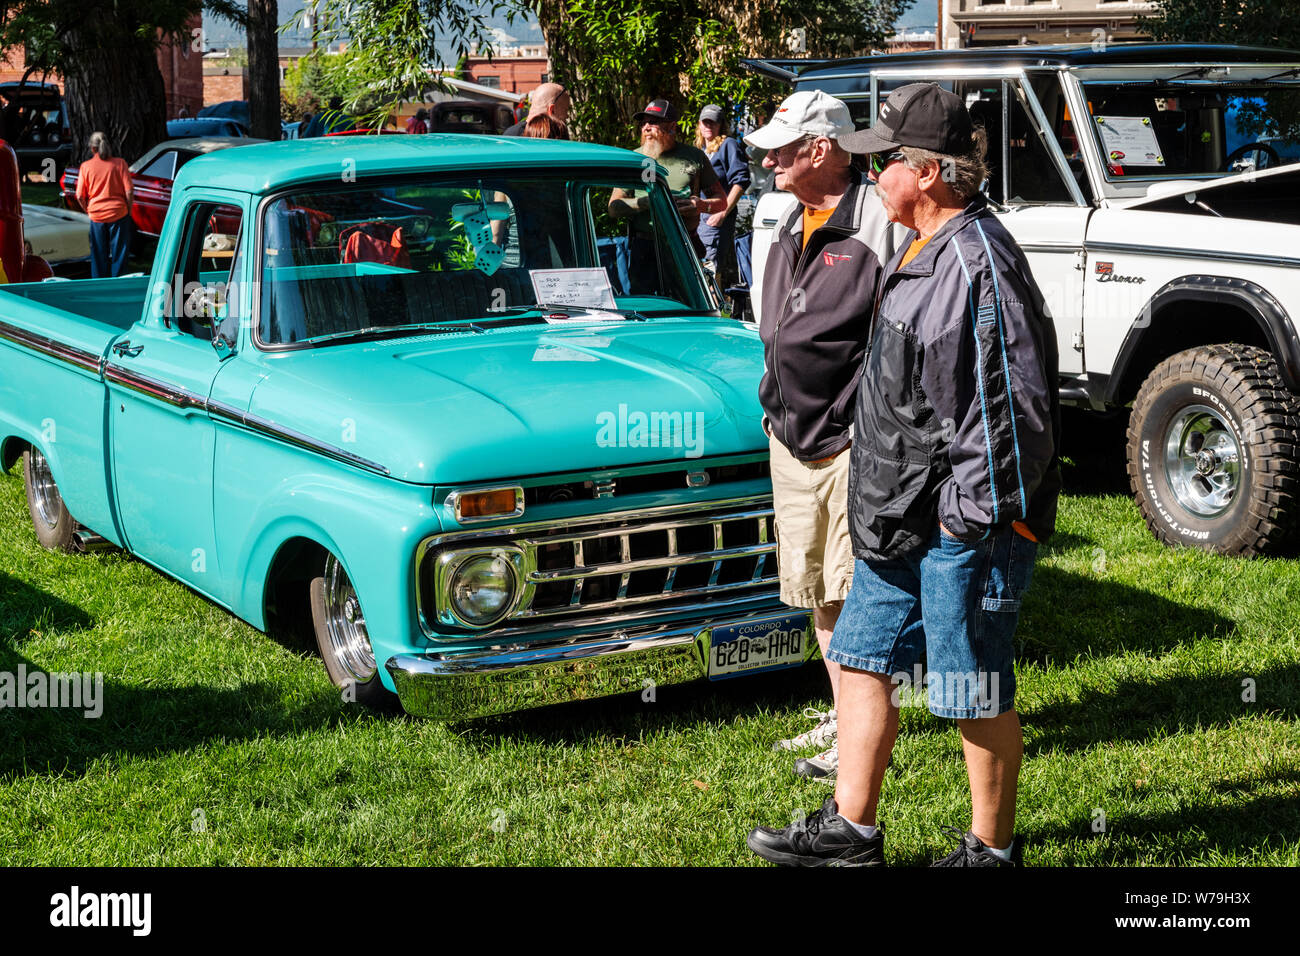 1965 Ford pick-up truck; Angel of Shavano Car Show, fund raiser for Chaffee County Search & Rescue South, Salida, Colorado, USA Stock Photo